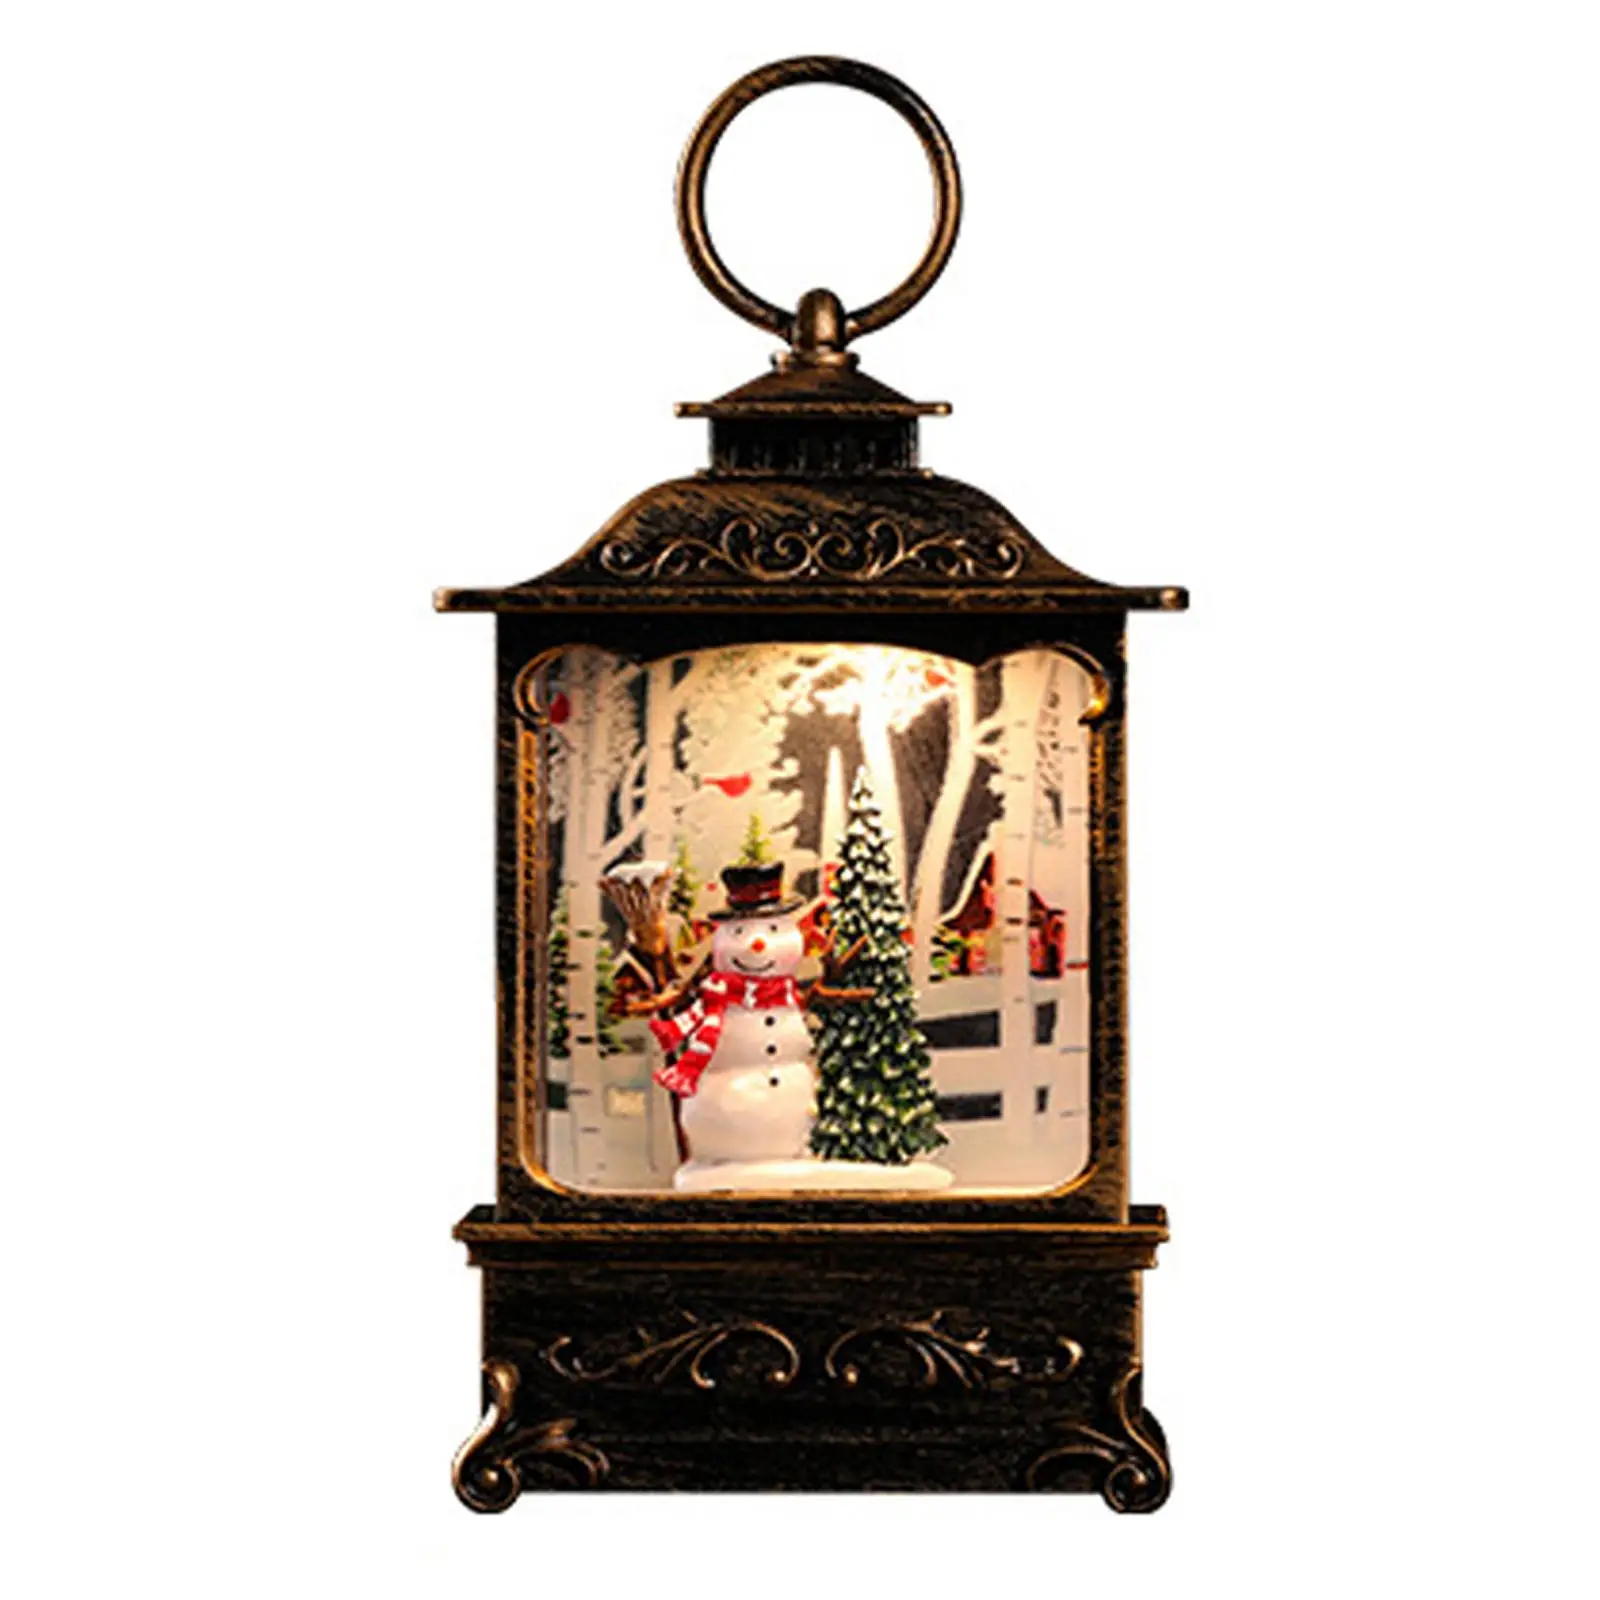 Hanging Lighted Xmas Lantern Festival Ornament Xmas Decorative Lamp for Fireplace Home Dining Table Decor